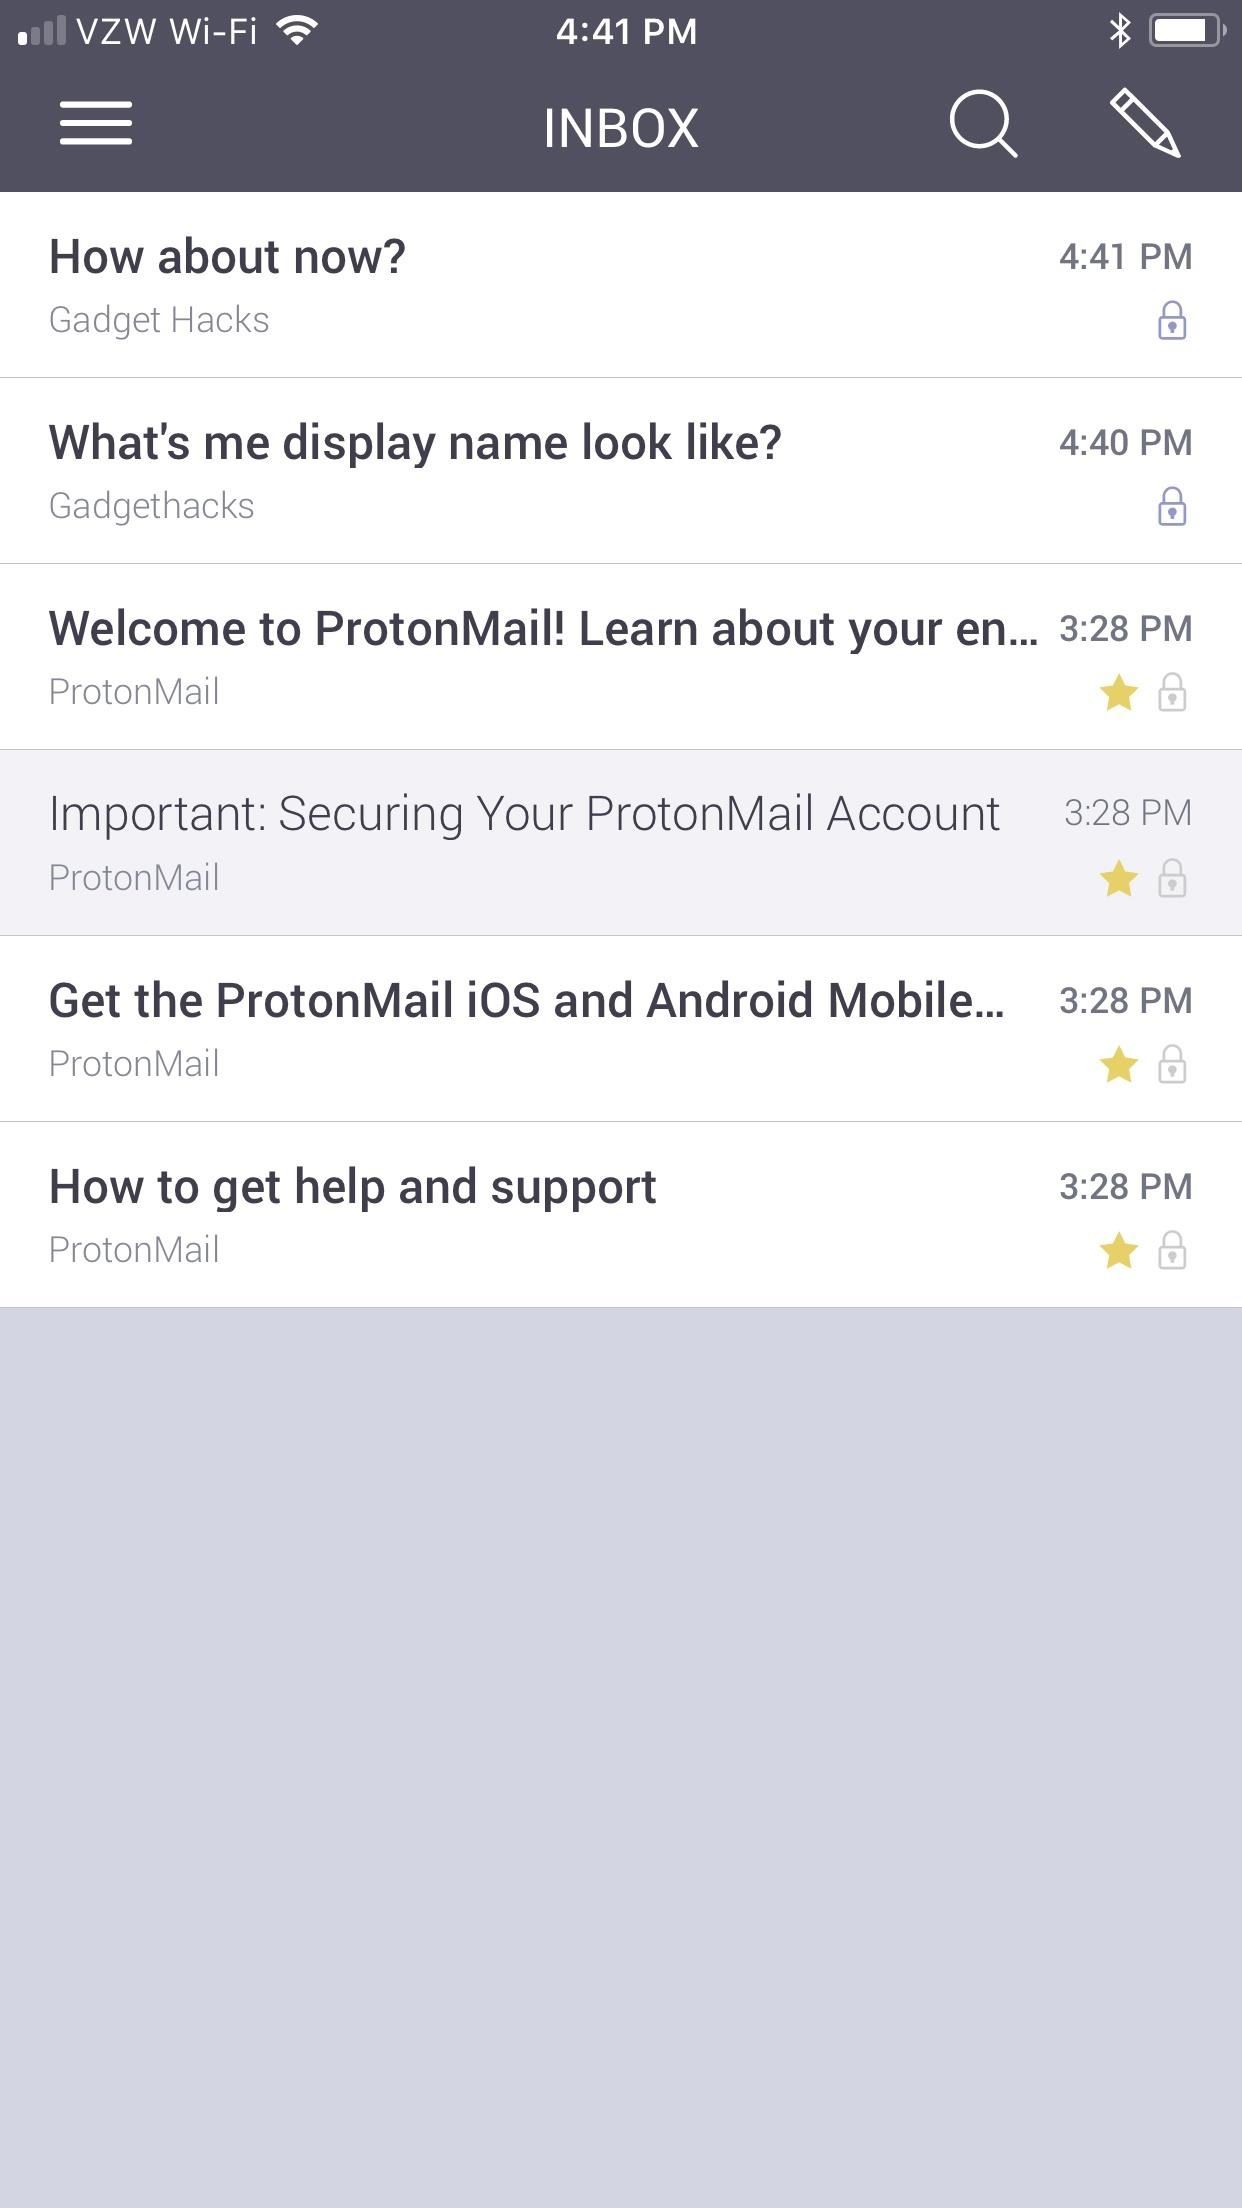 ProtonMail 101: How to Change Your Display Name That Shows Up in Emails